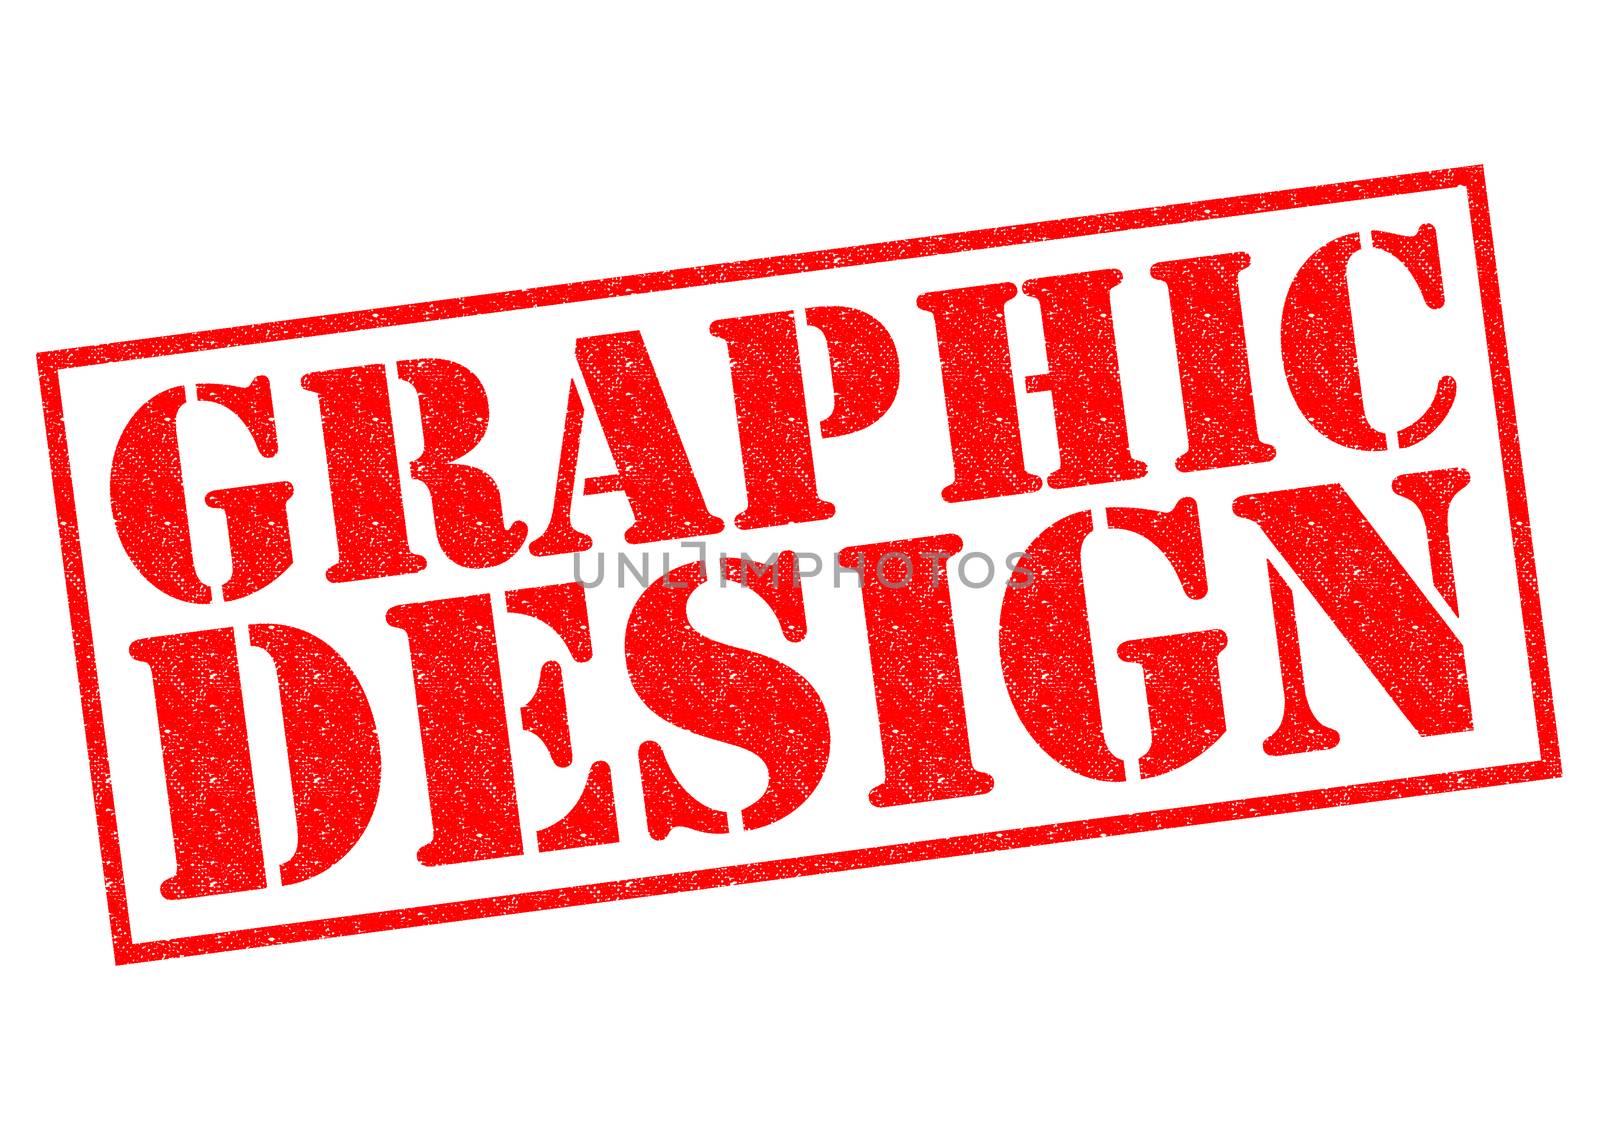 GRAPHIC DESIGN red Rubber Stamp over a white background.